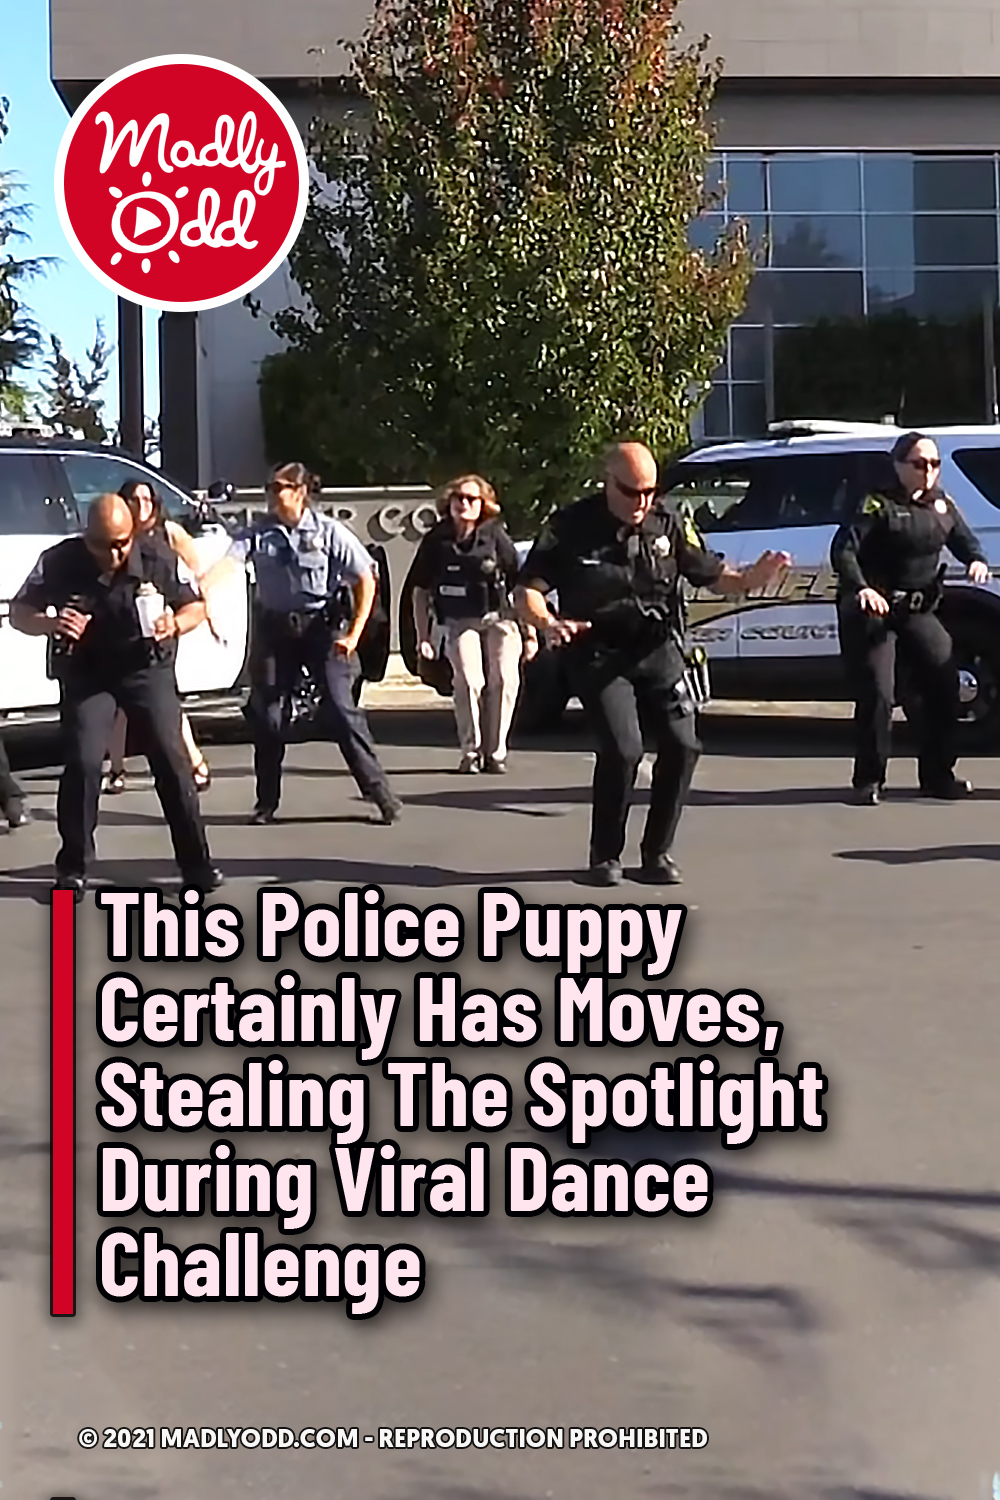 This Police Puppy Certainly Has Moves, Stealing The Spotlight During Viral Dance Challenge